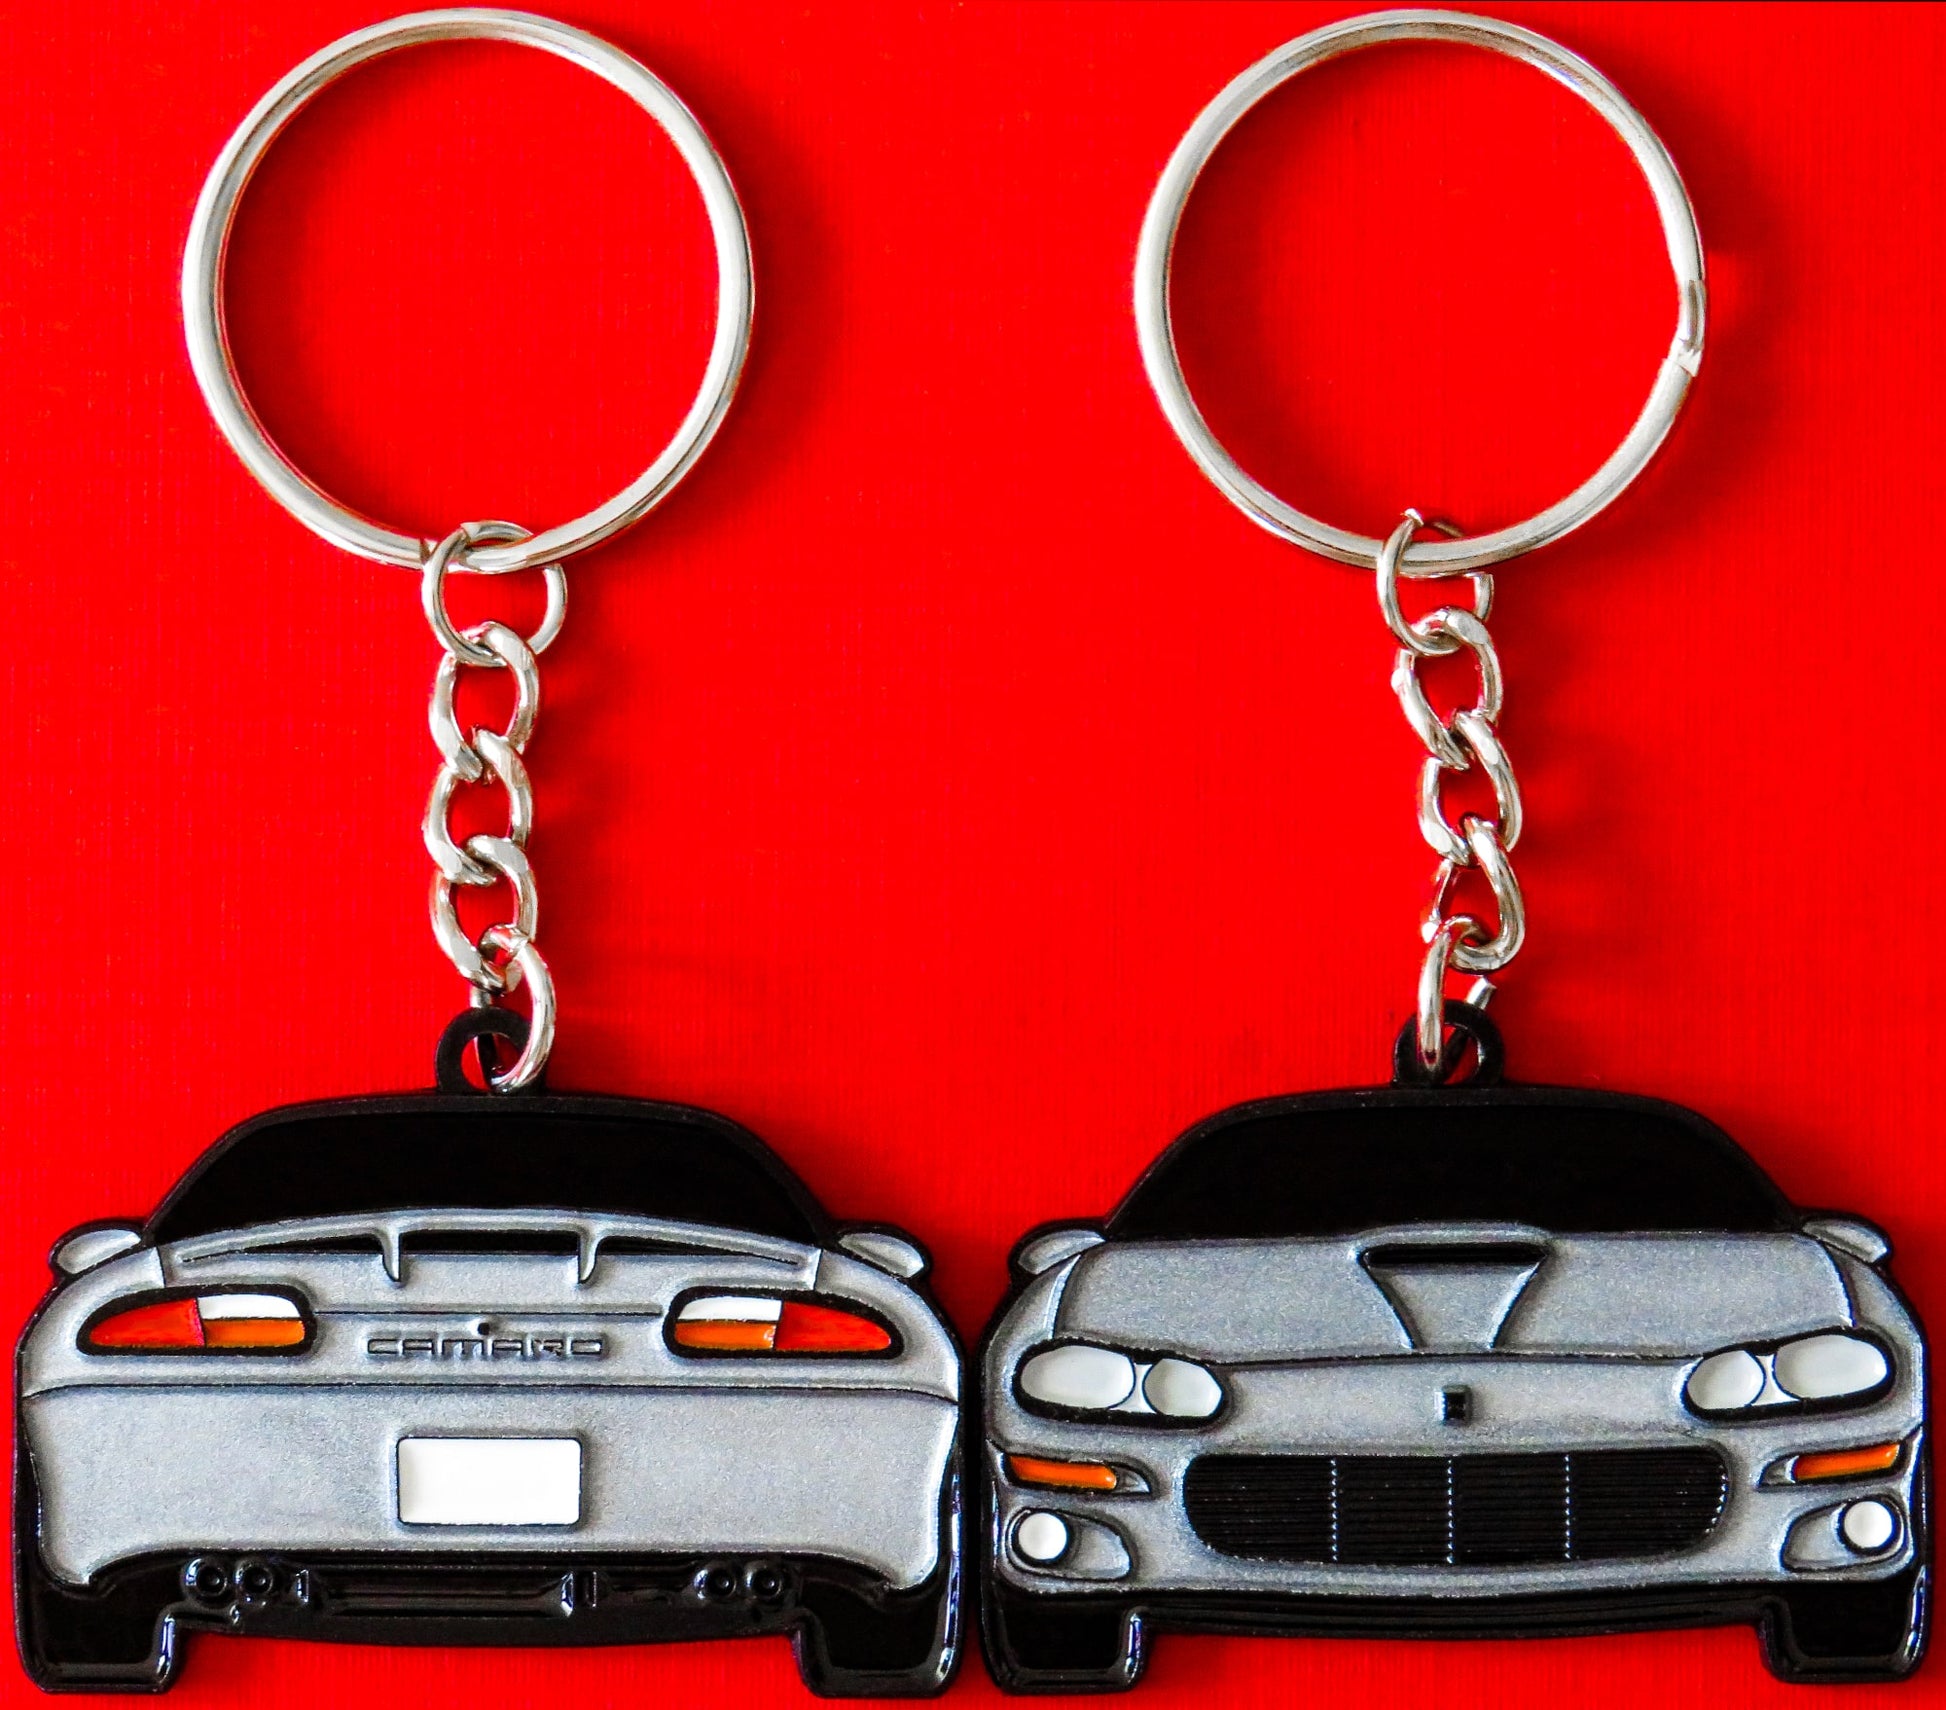 Enamel Keychain Pin Patch Lanyard that fits on a key fob For Chevy Camaro SS RS ZL1 1LE, Z28, and Z/28 4TH Generation 6th Gen American muscle car accessories, jet tag, key ring gift ideas for car guys, car enthusiasts, gearheads, father, mother, dad, mom, him, her, boyfriend, girlfriend and more. The ultimate keychain for Catfish Camaro owners fans and enthusiasts